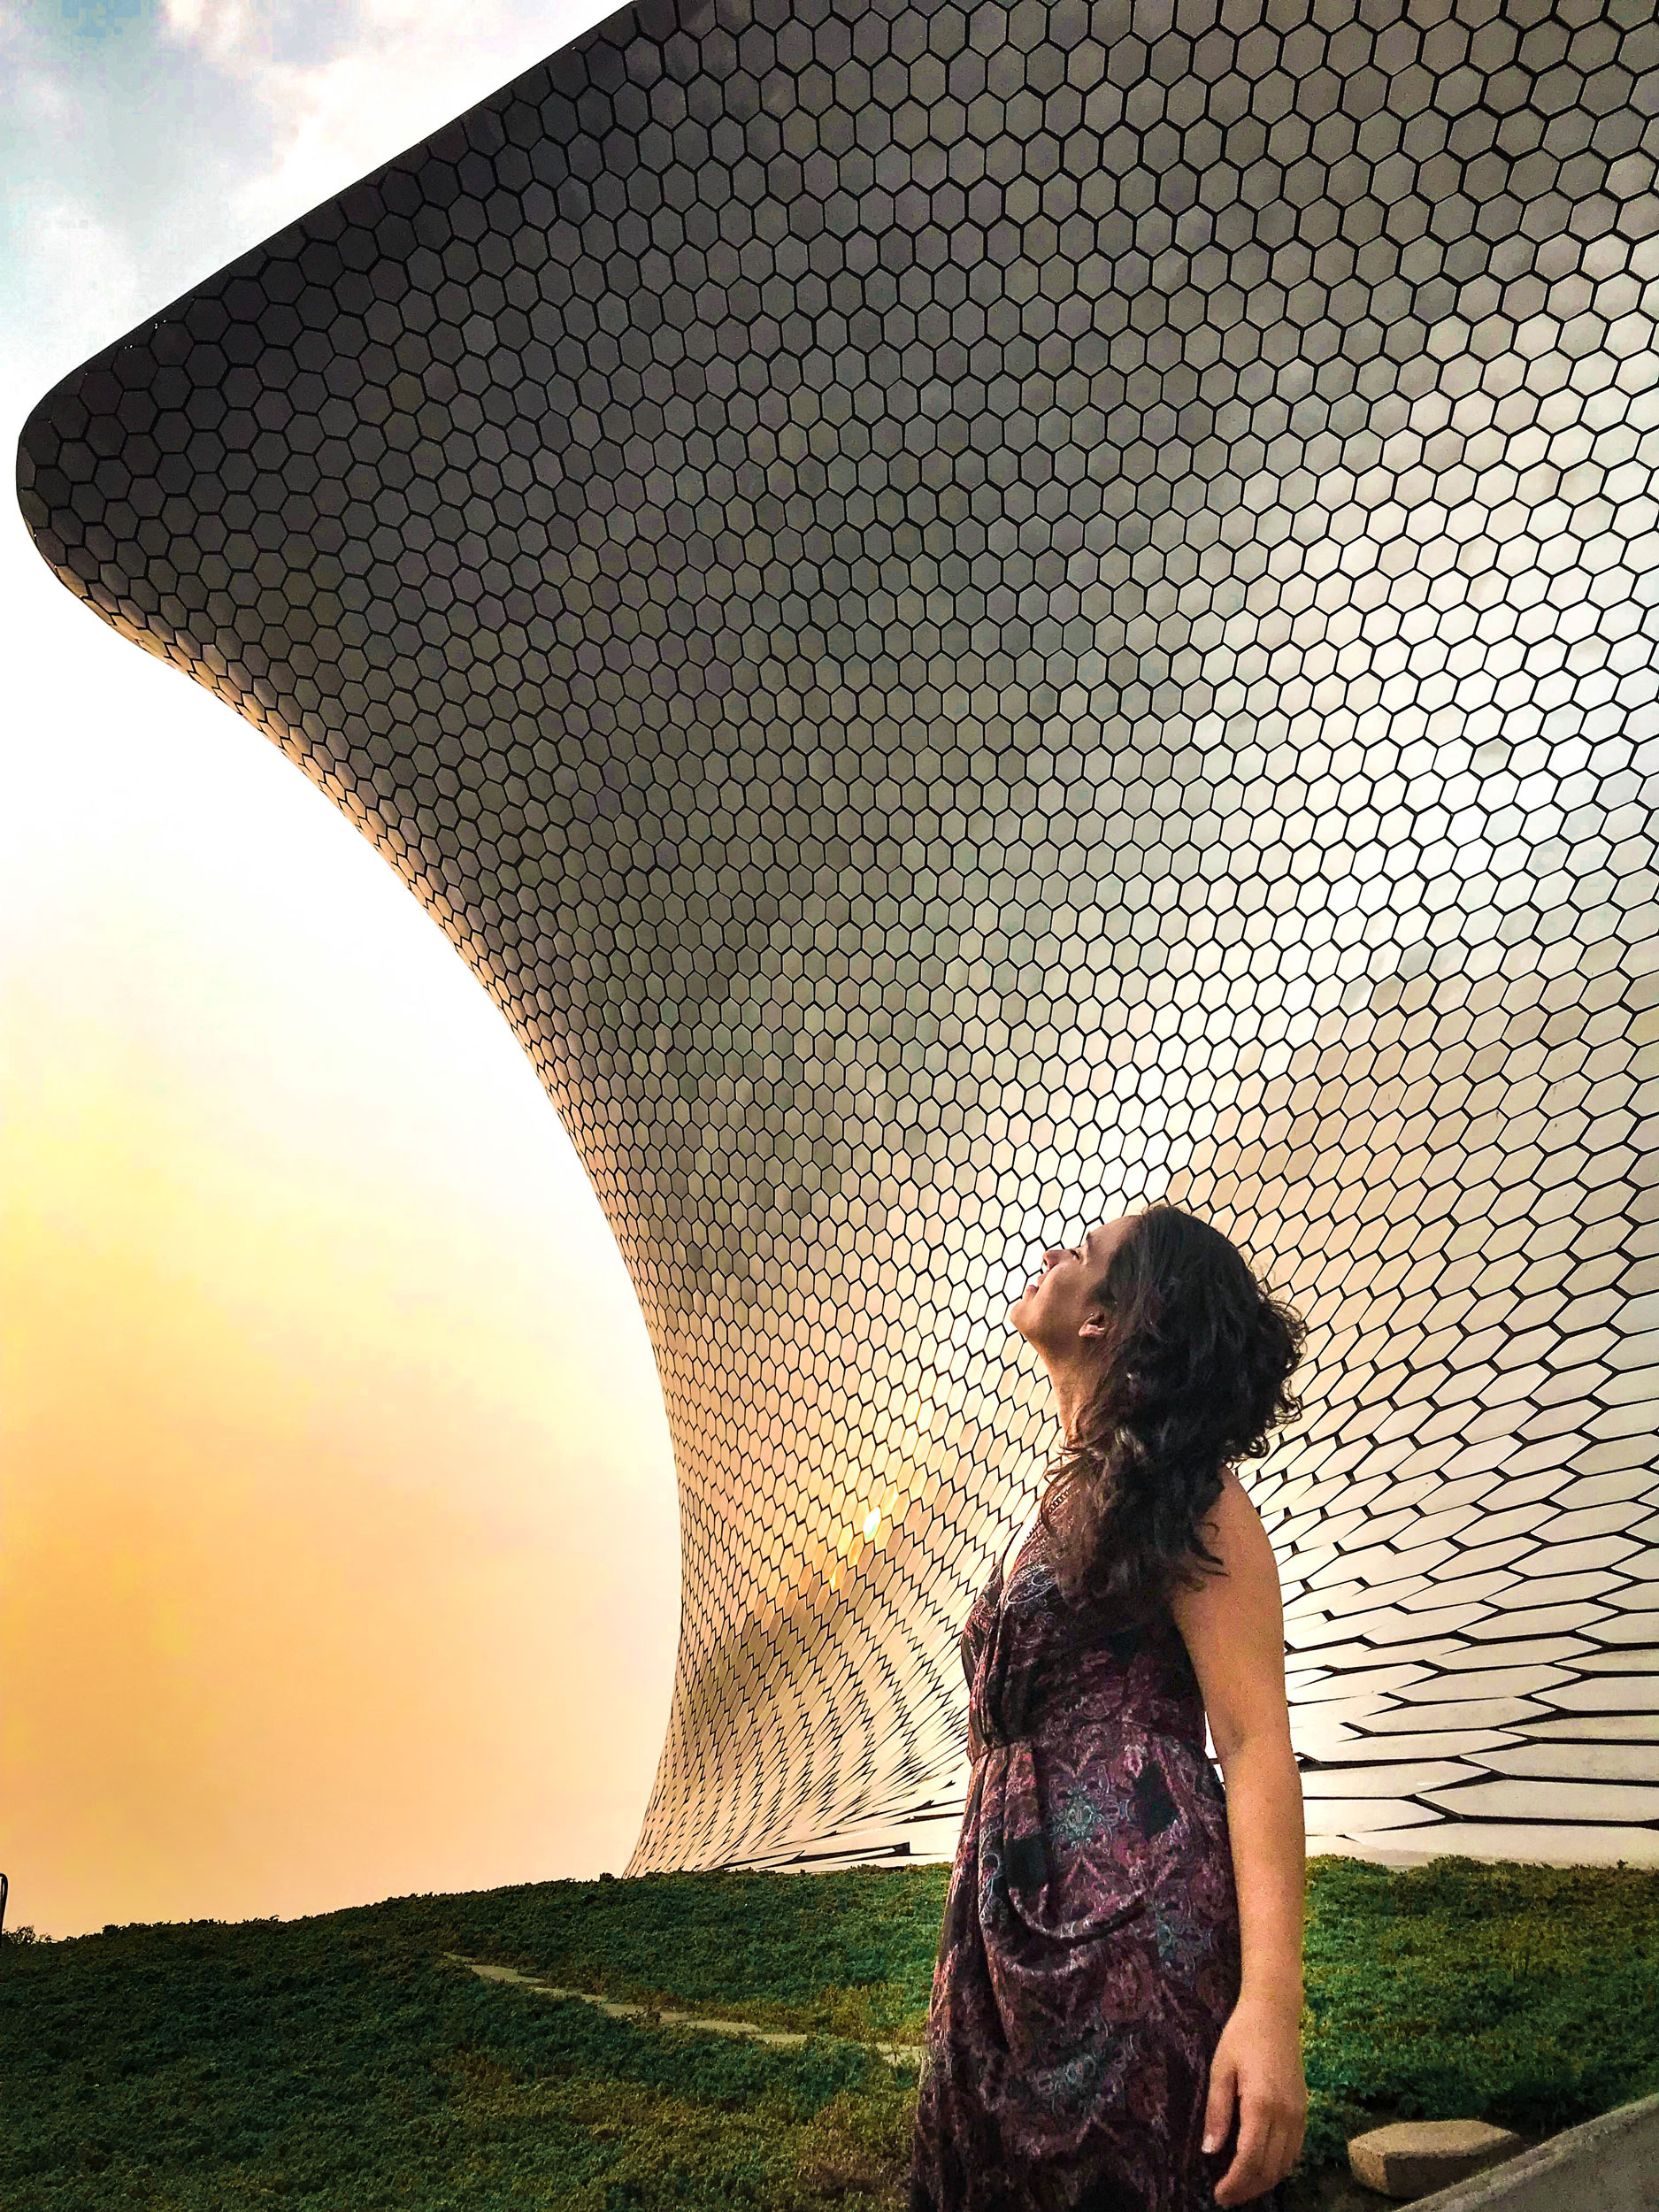 Museo Soumaya, one of many must-visit museums in Mexico city, CDMX Diego Rivera